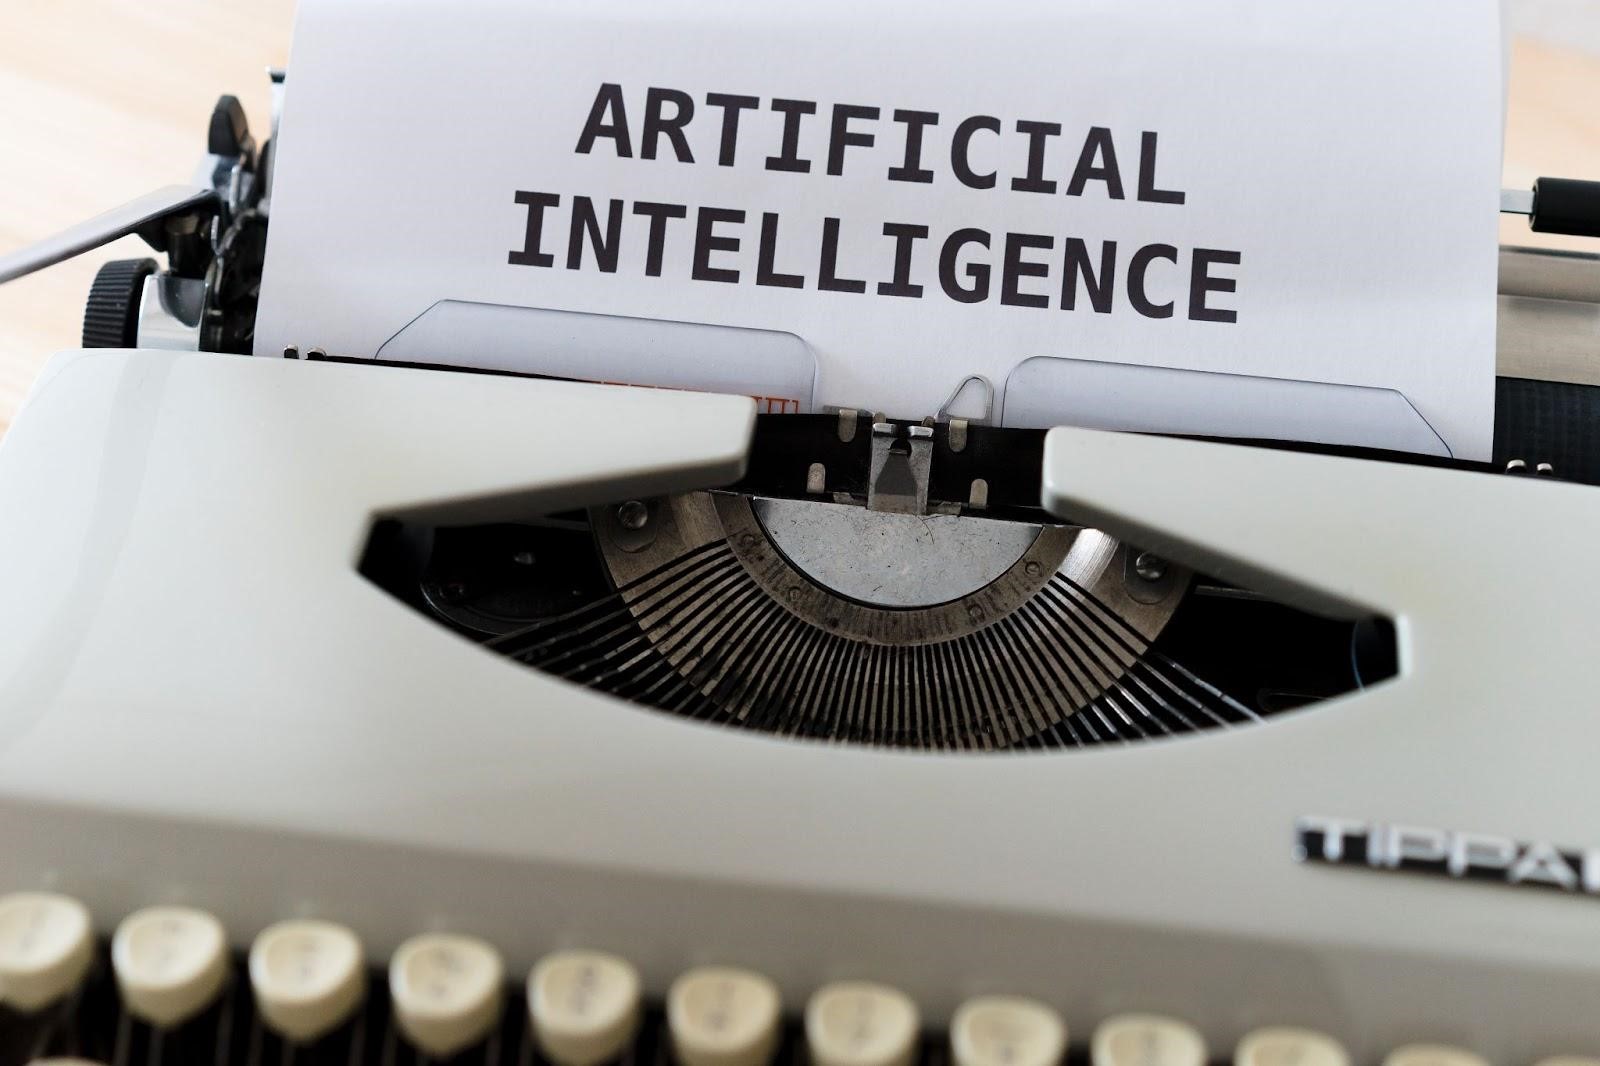 7 Amazing Uses of Artificial Intelligence Today